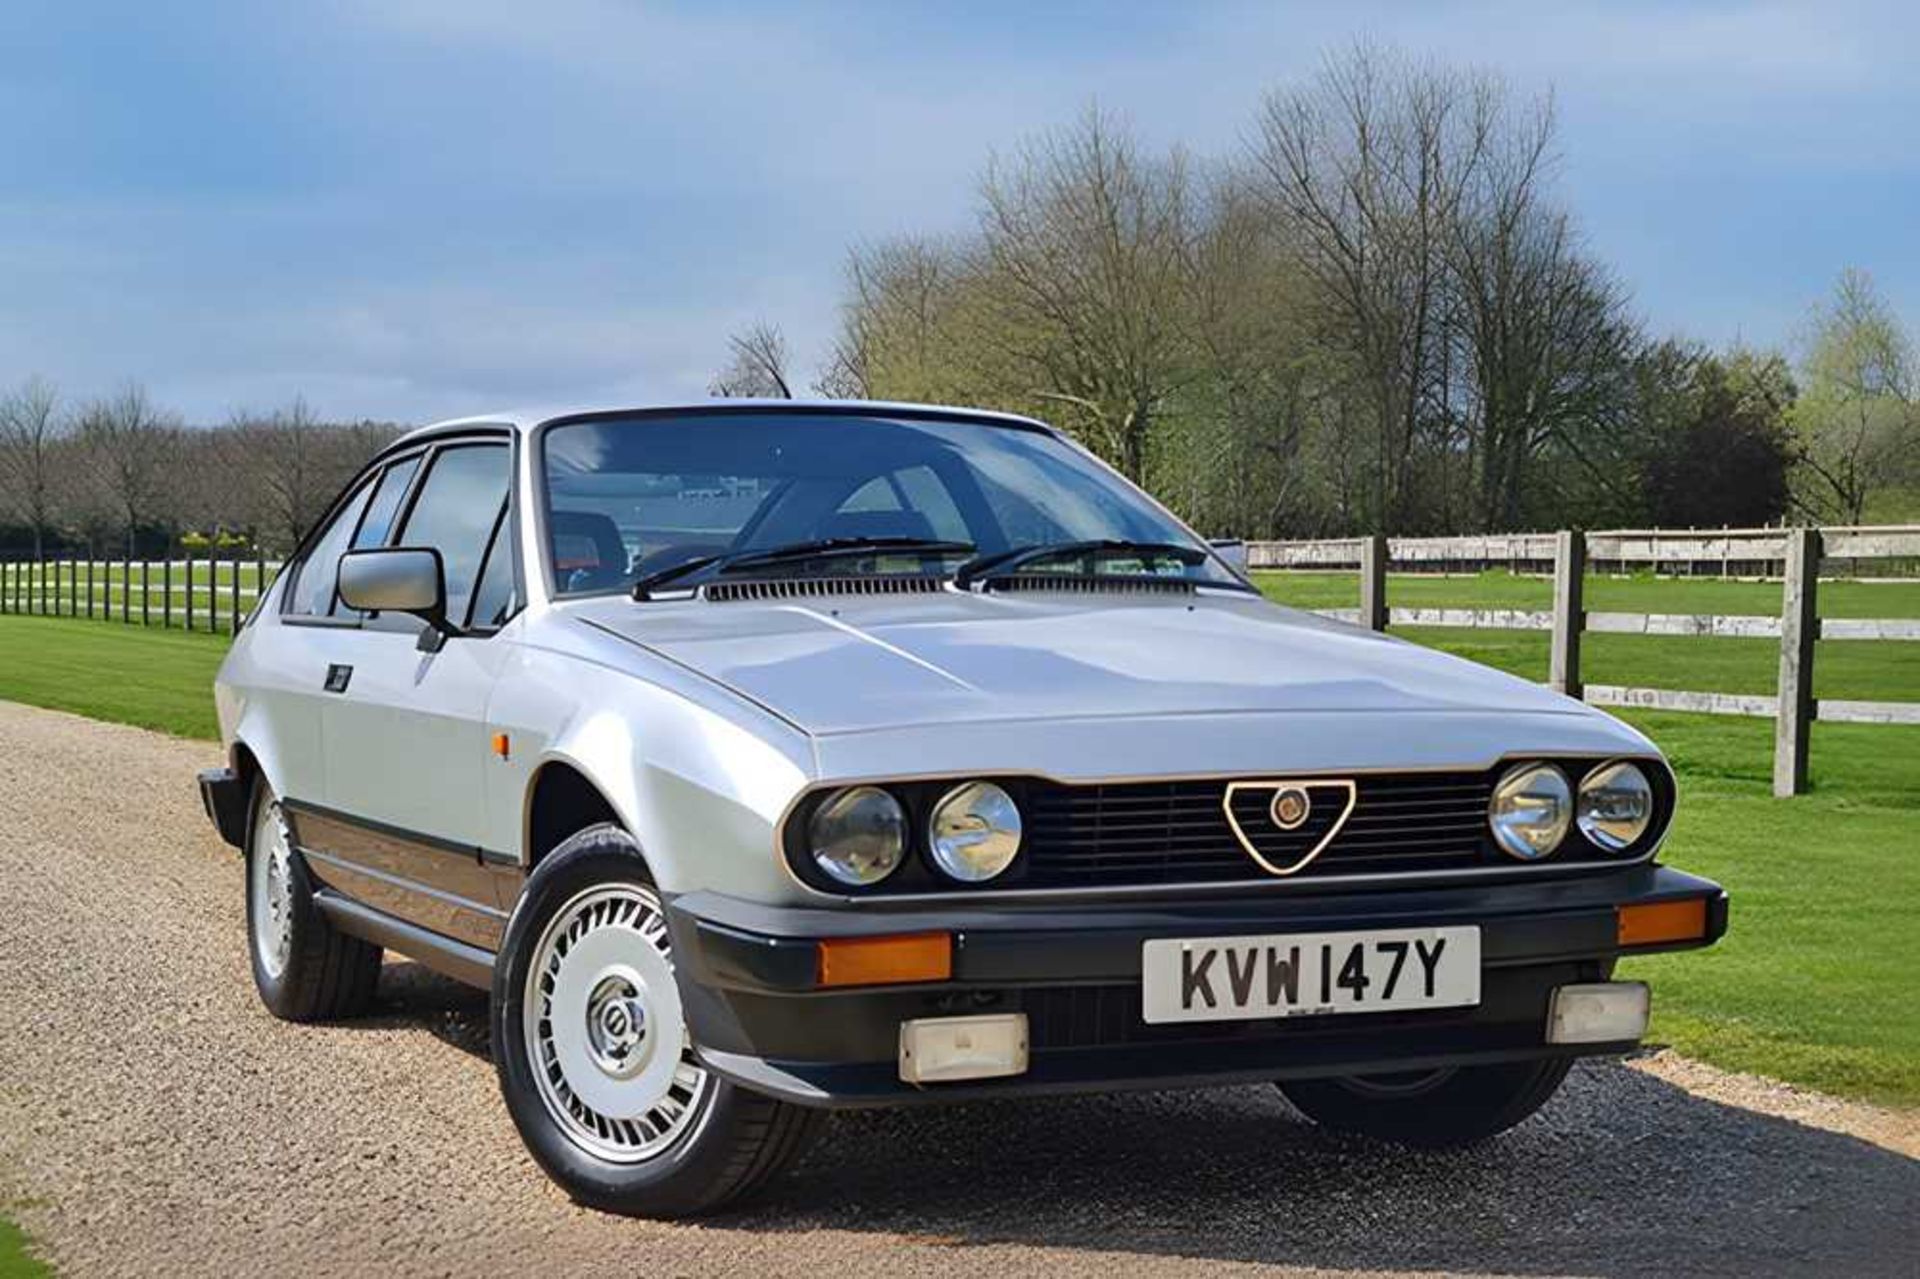 1983 Alfa Romeo GTV 2.0 litre Single family ownership and 48,000 miles from new - Image 42 of 51